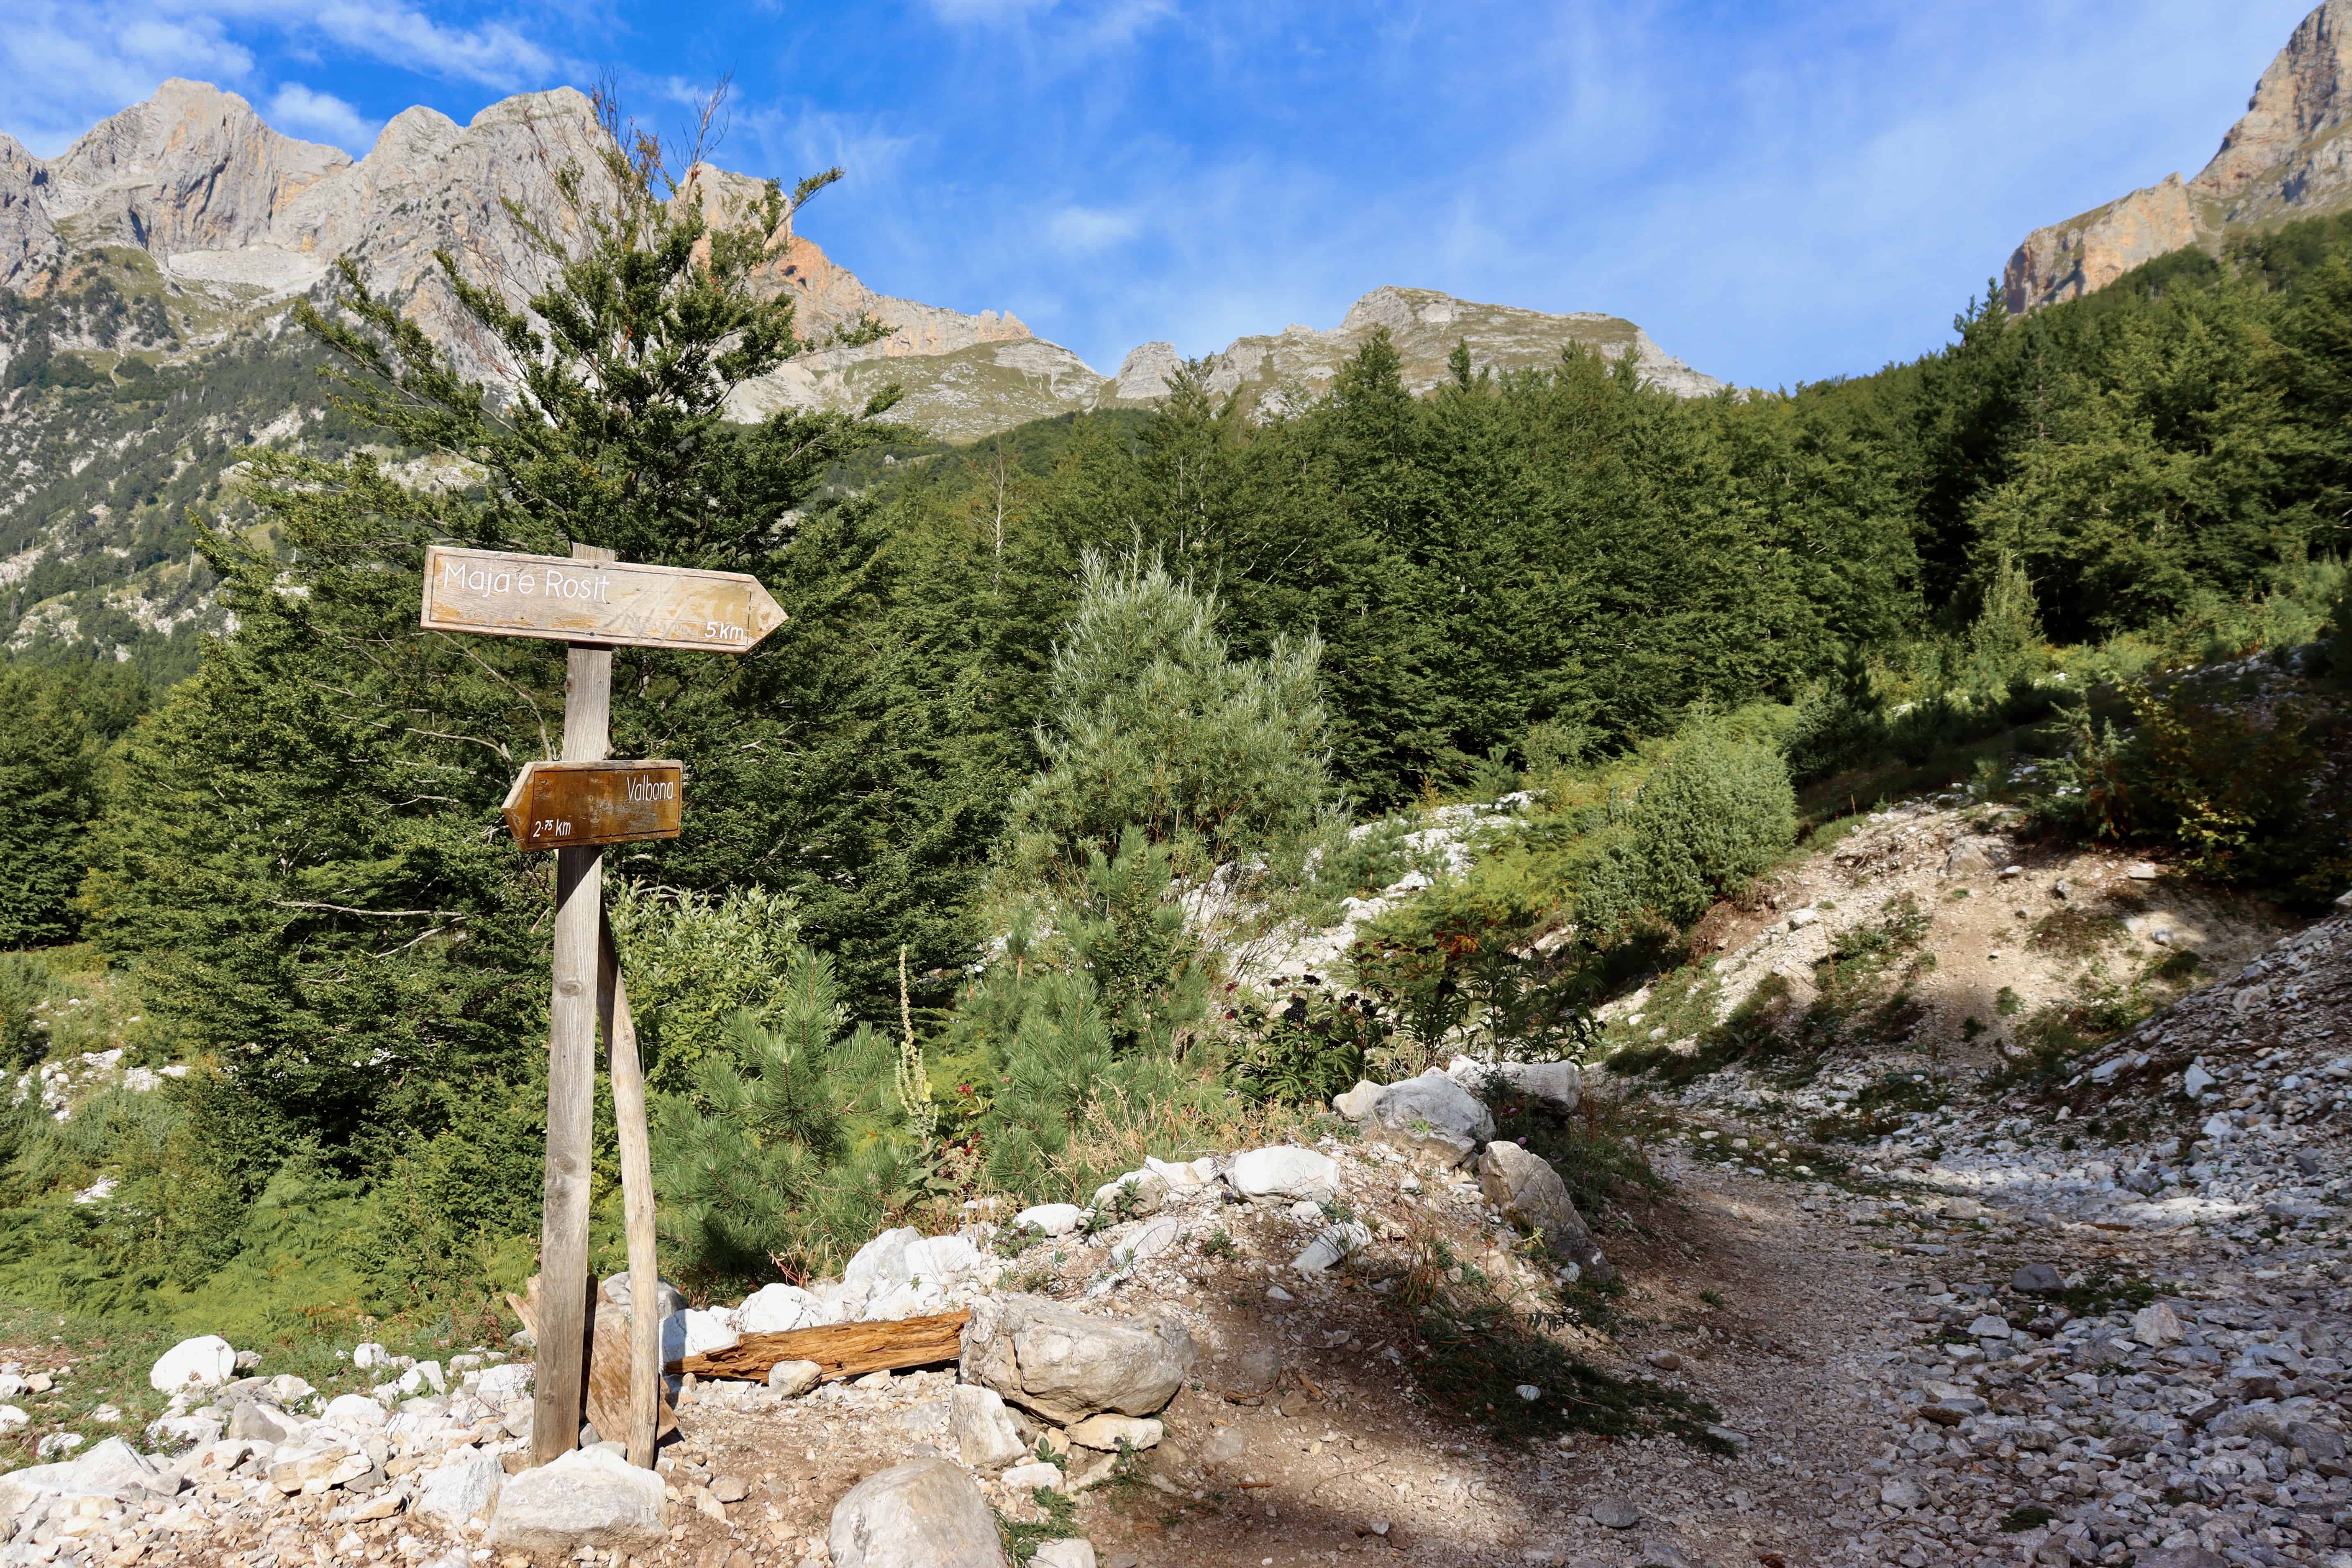 Signs in the Albanian Alps